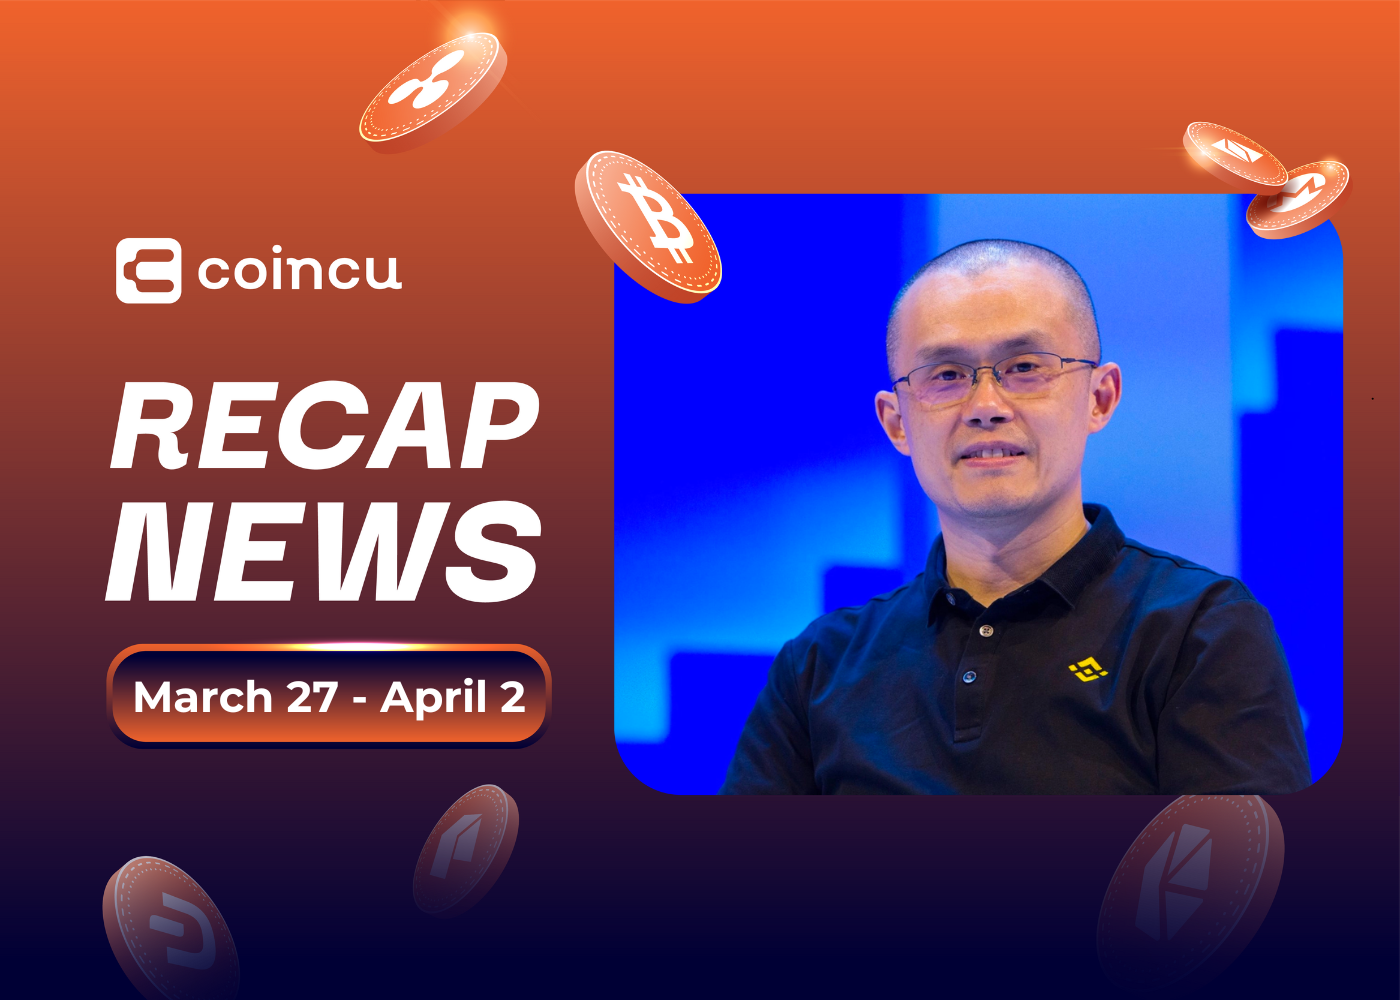 Weekly Top Crypto News (March 27 - April 2)